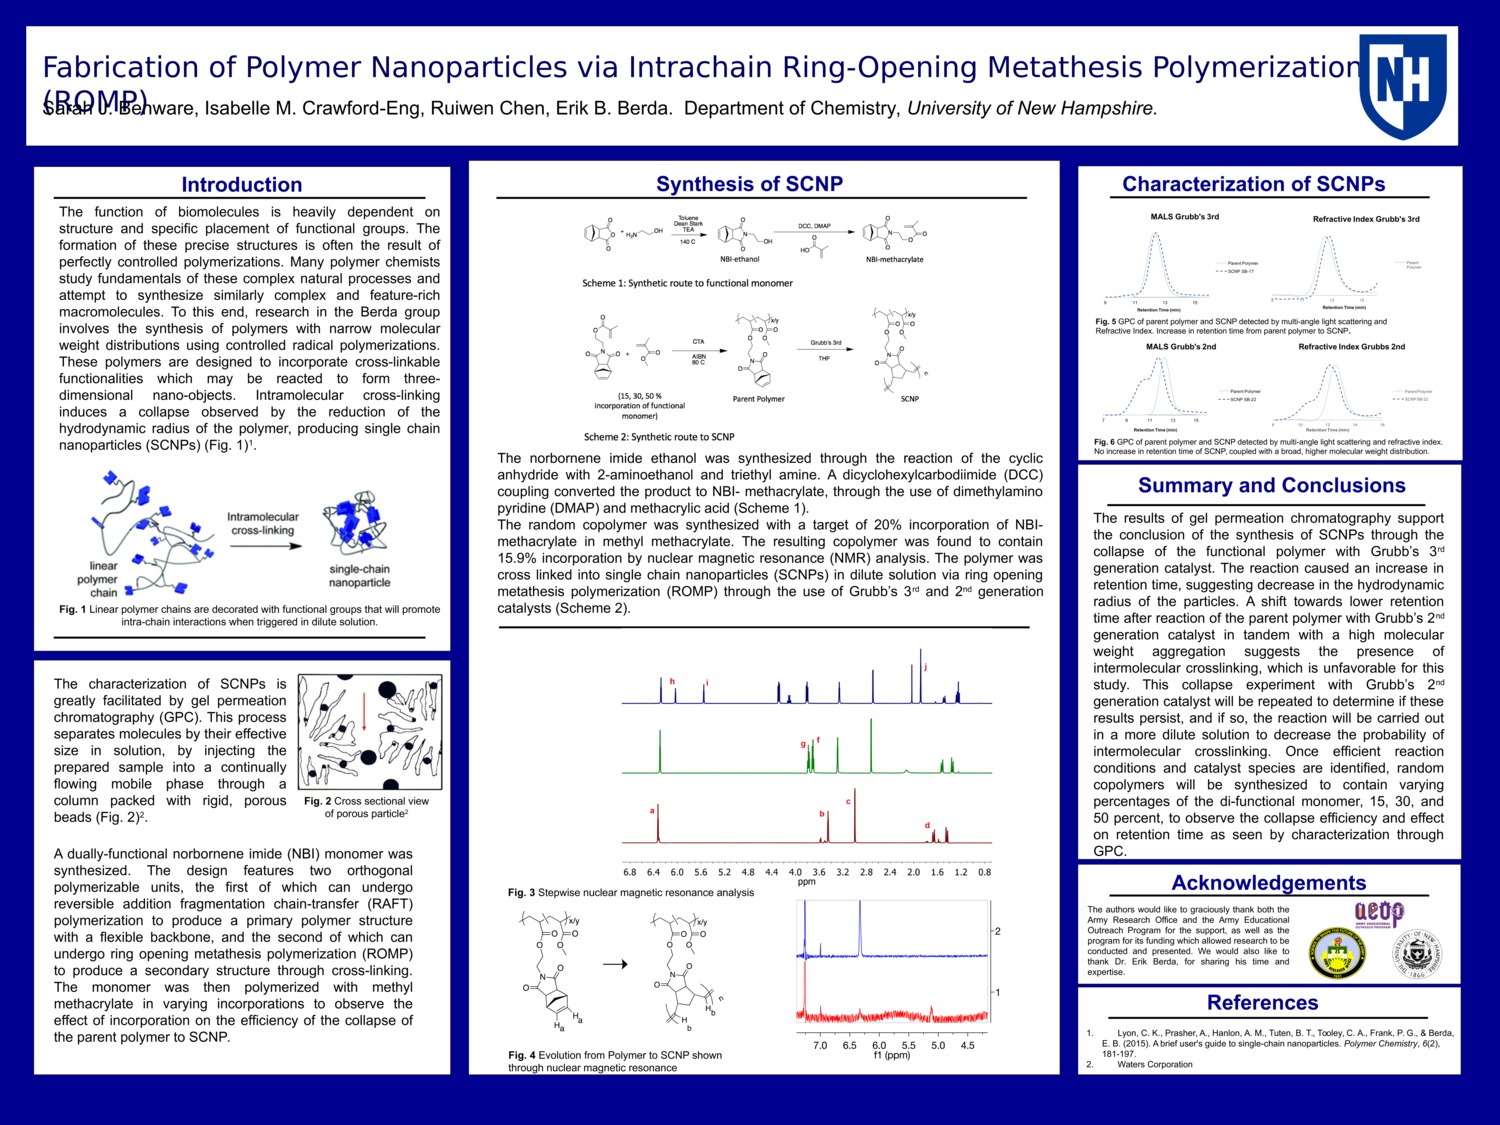 Fabrication Of Polymer Nanoparticles Via Intrachain Ring-Opening Metathesis Polymerizations (Romp) by sjb1015